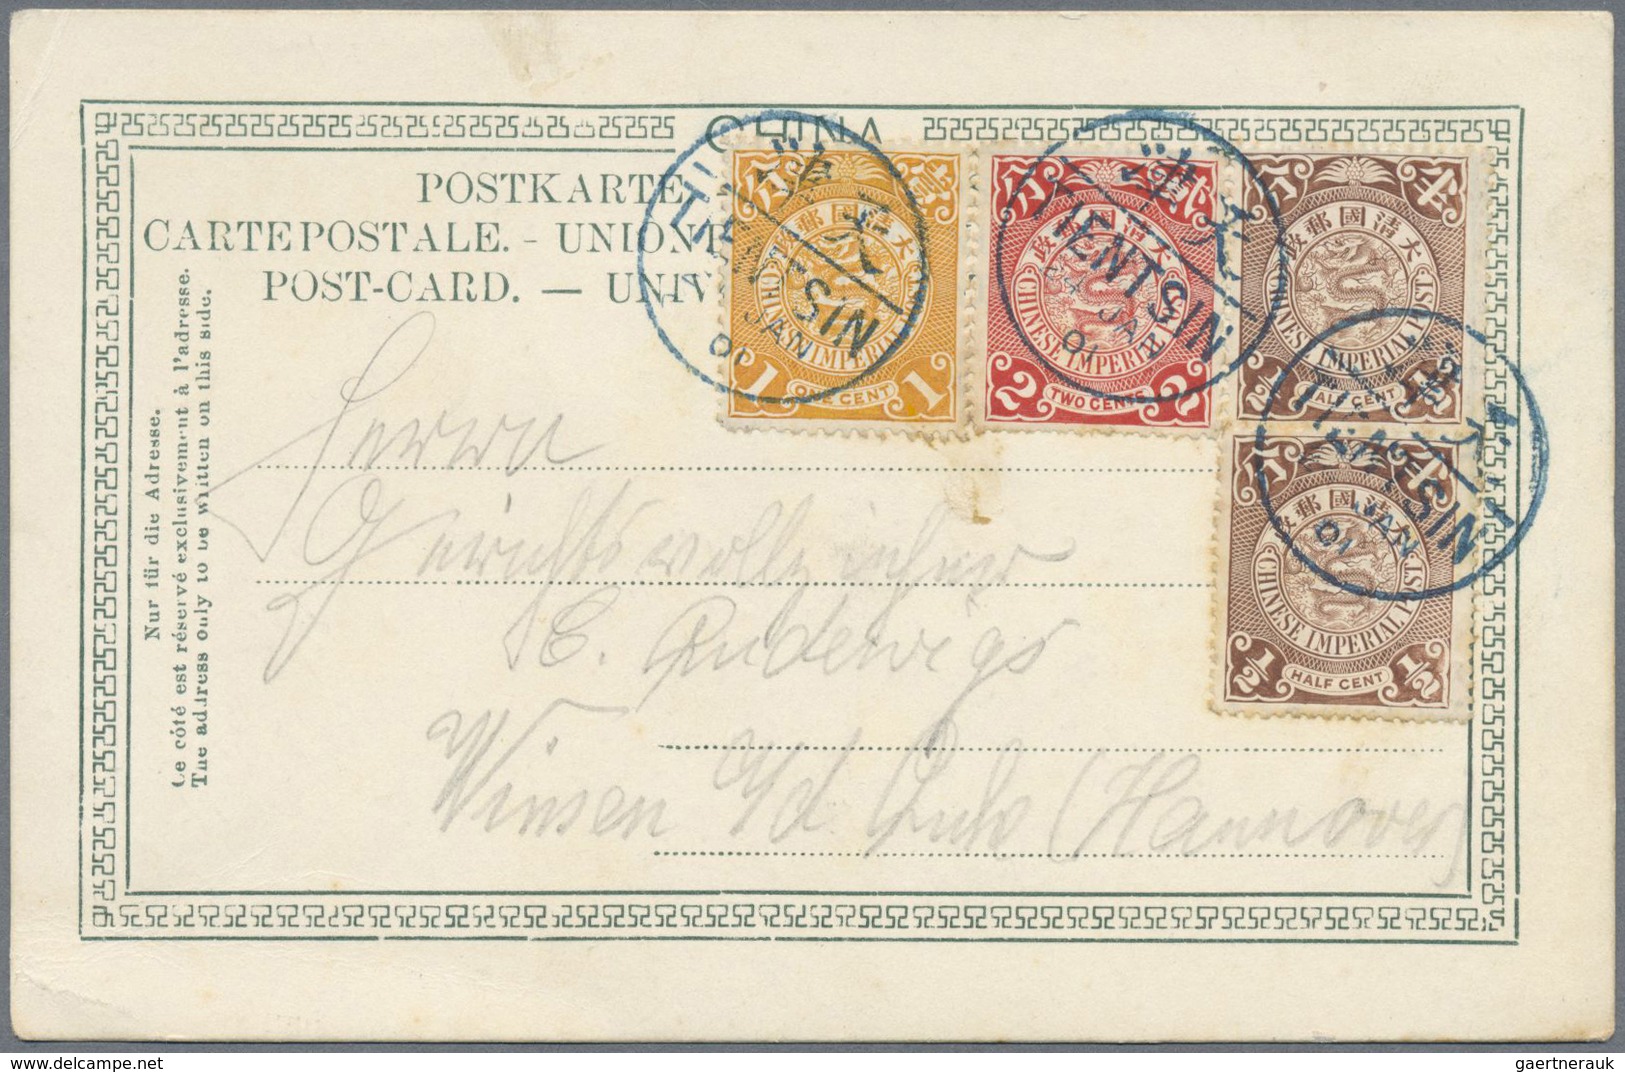 Br/ China: 1898/1912, coiling dragons on covers (5), ppc (5) used to Germany or China inland; also 1912